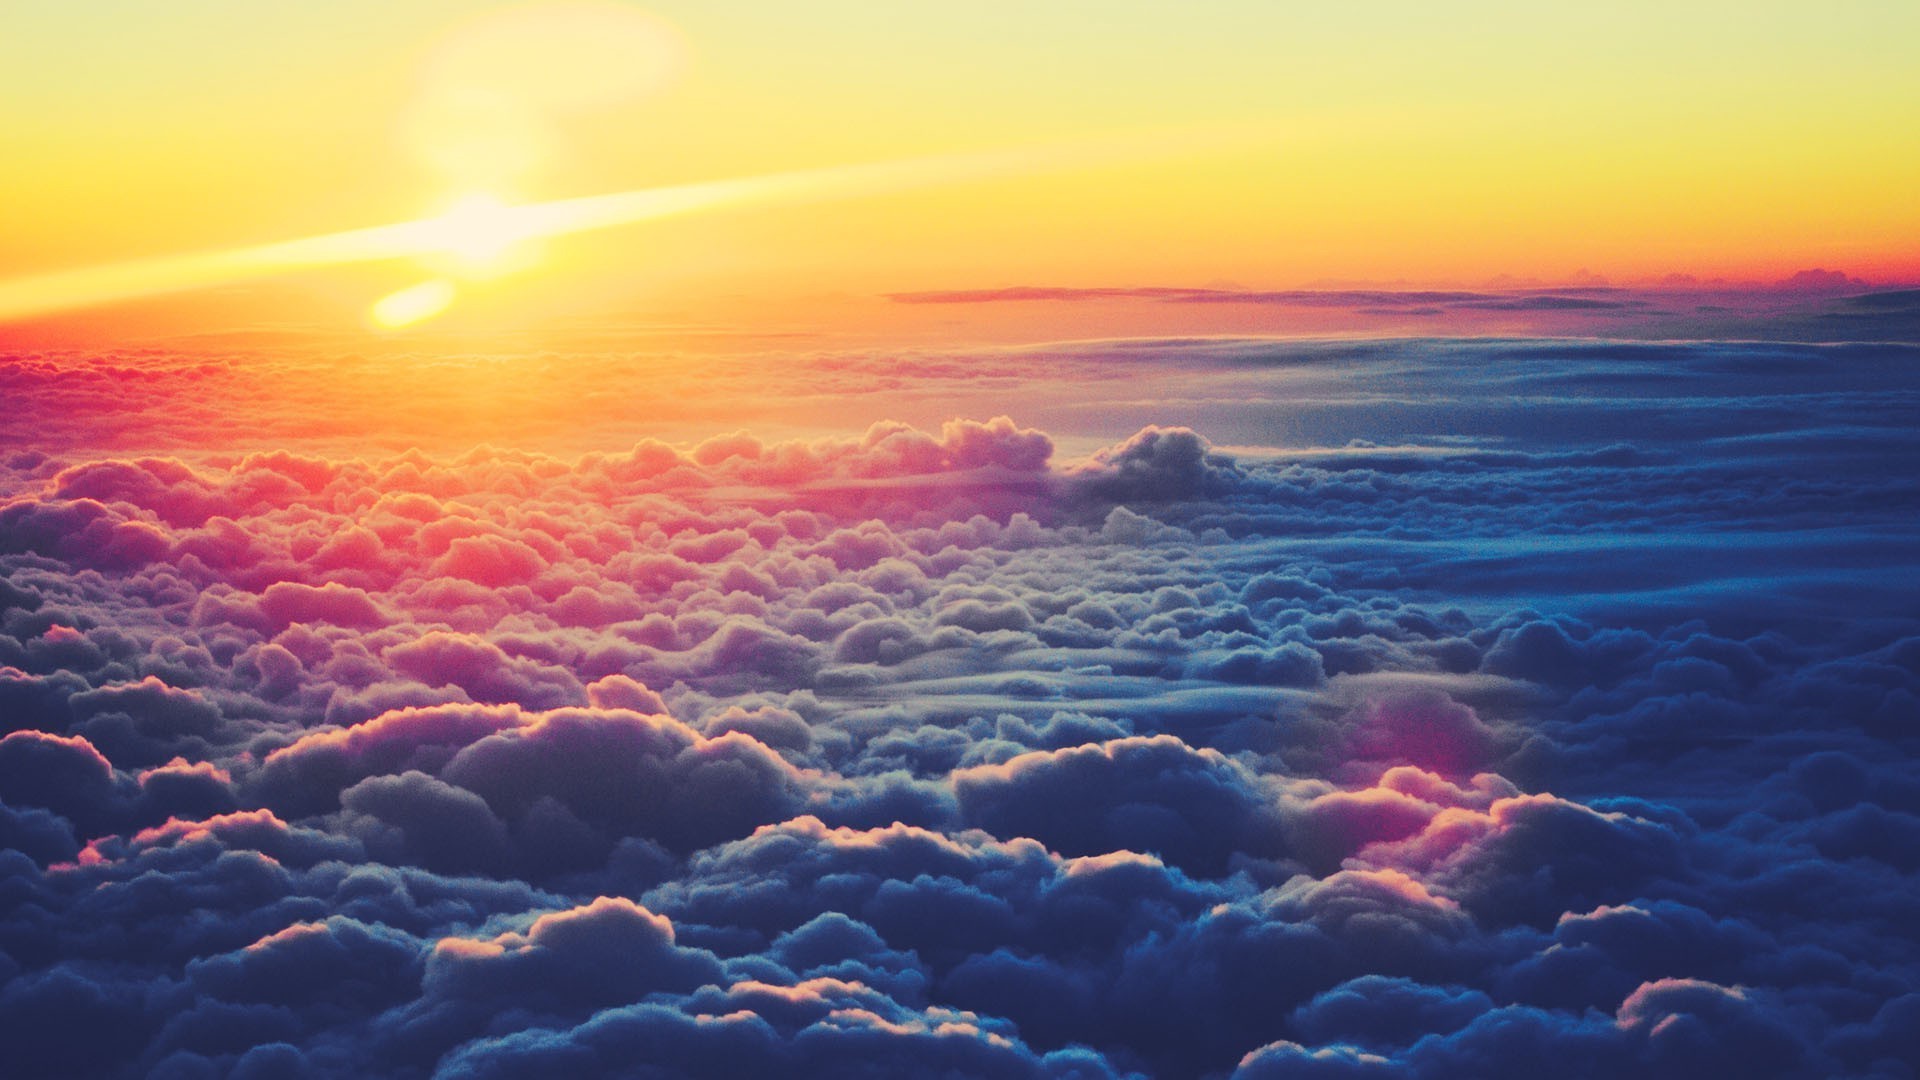 Wallpaper clouds and sunset, sky, sea of clouds desktop wallpaper, hd  image, picture, background, 2e0a0c | wallpapersmug